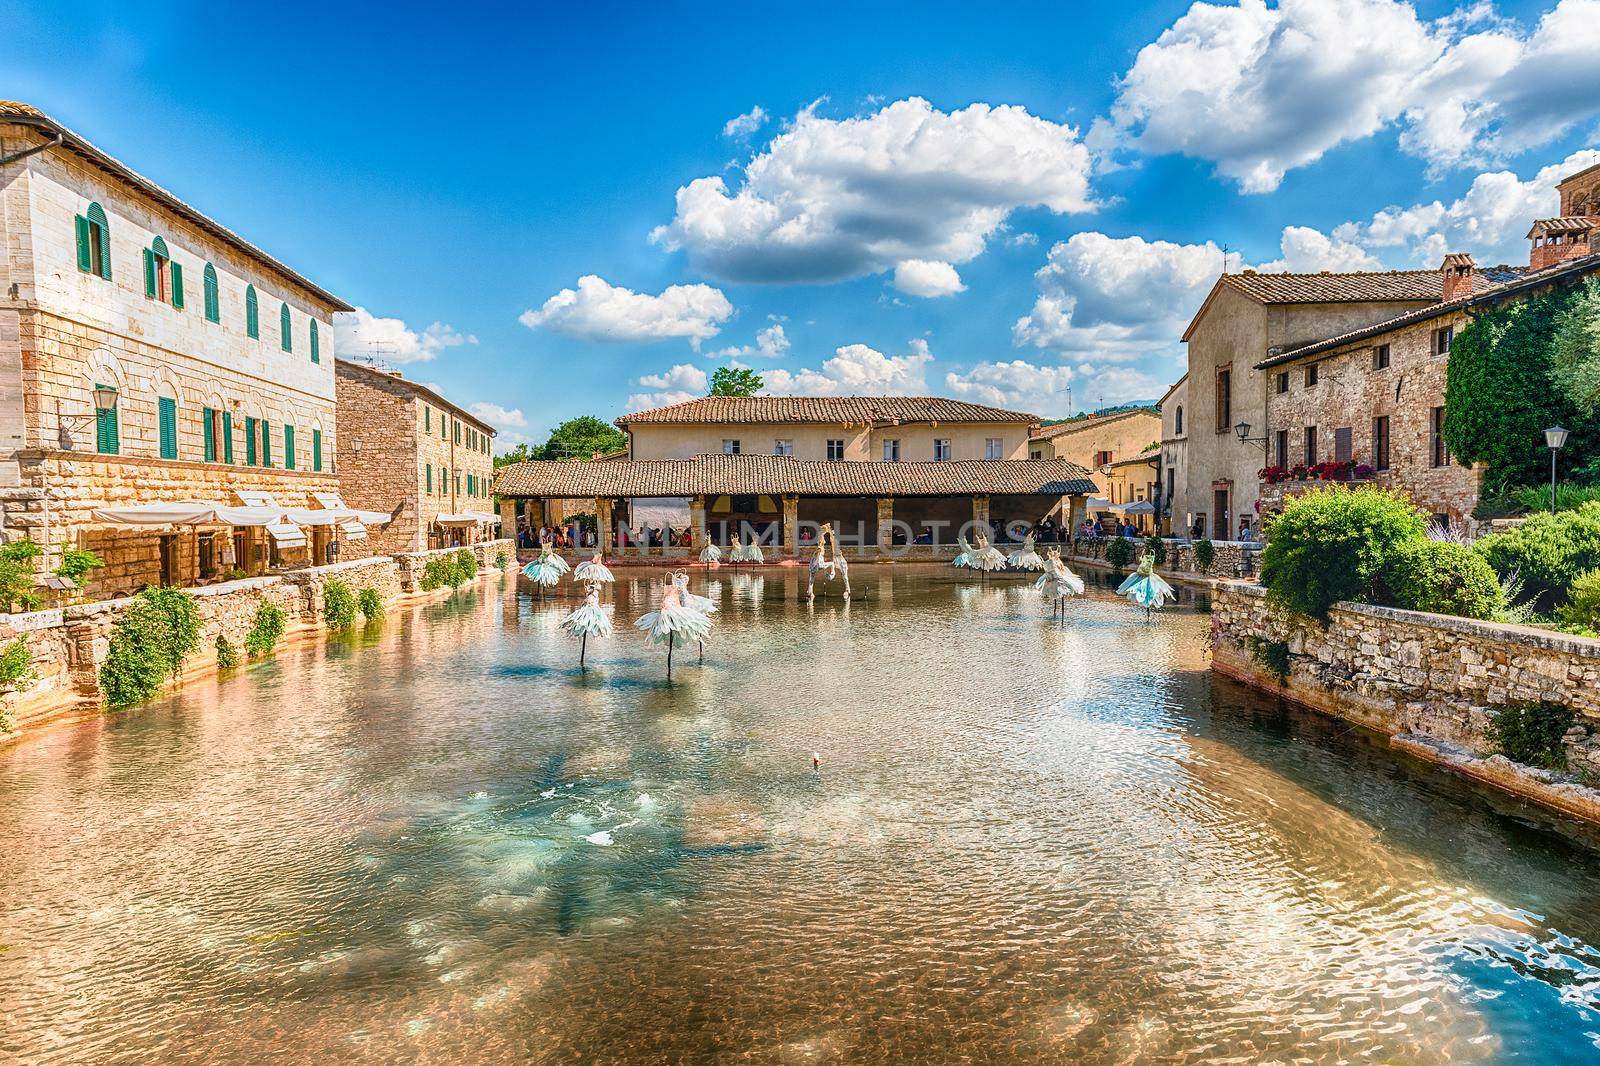 The iconic medieval thermal baths, major landmark and sightseeing in the town of Bagno Vignoni, province of Siena, Tuscany, Italy